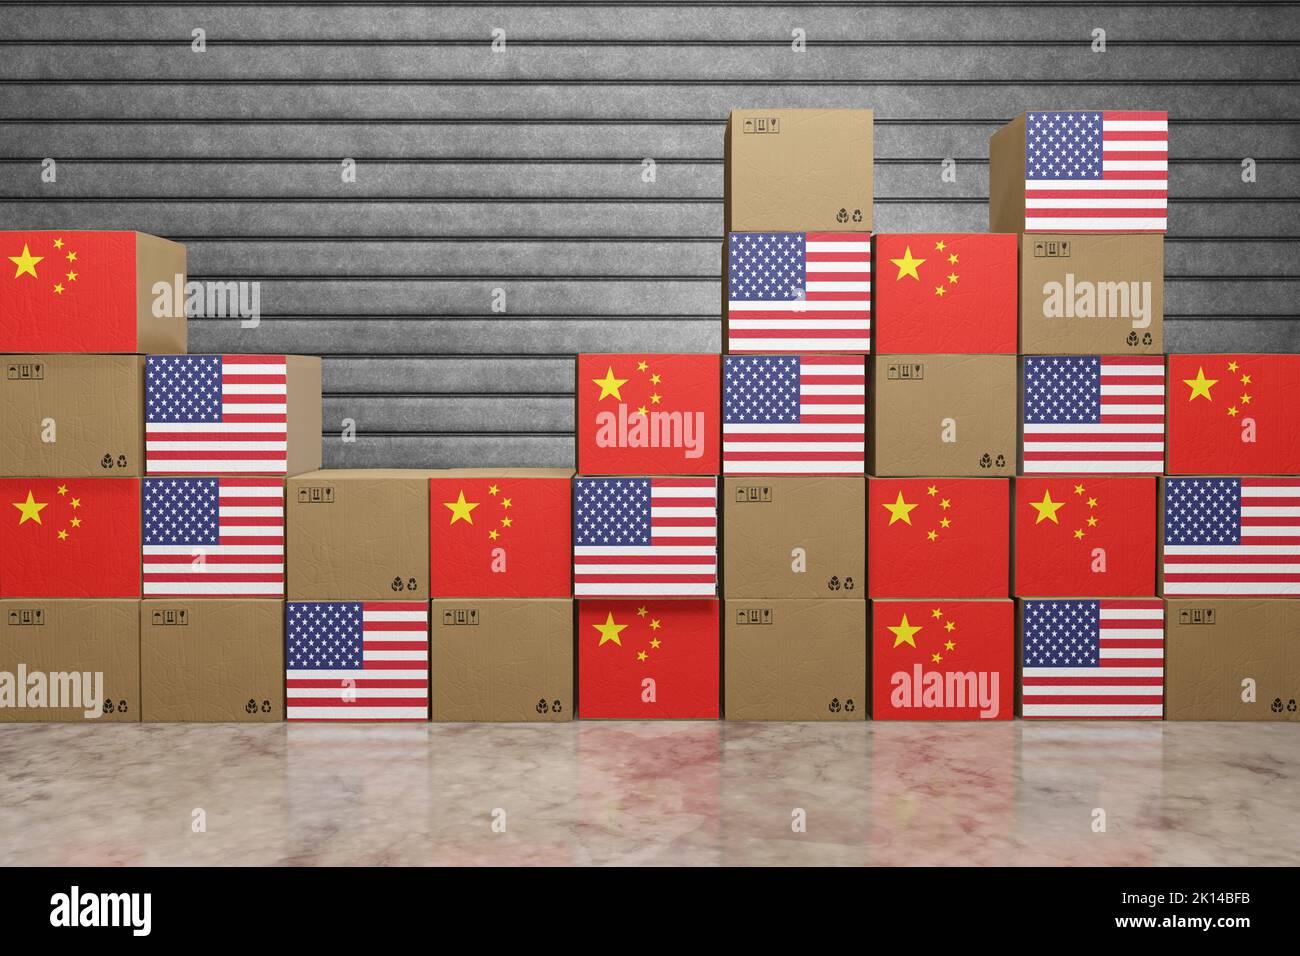 Stacks of carton boxes having national flags of the USA and China. Illustration of the trade war, import tariffs and extreme protectionism Stock Photo